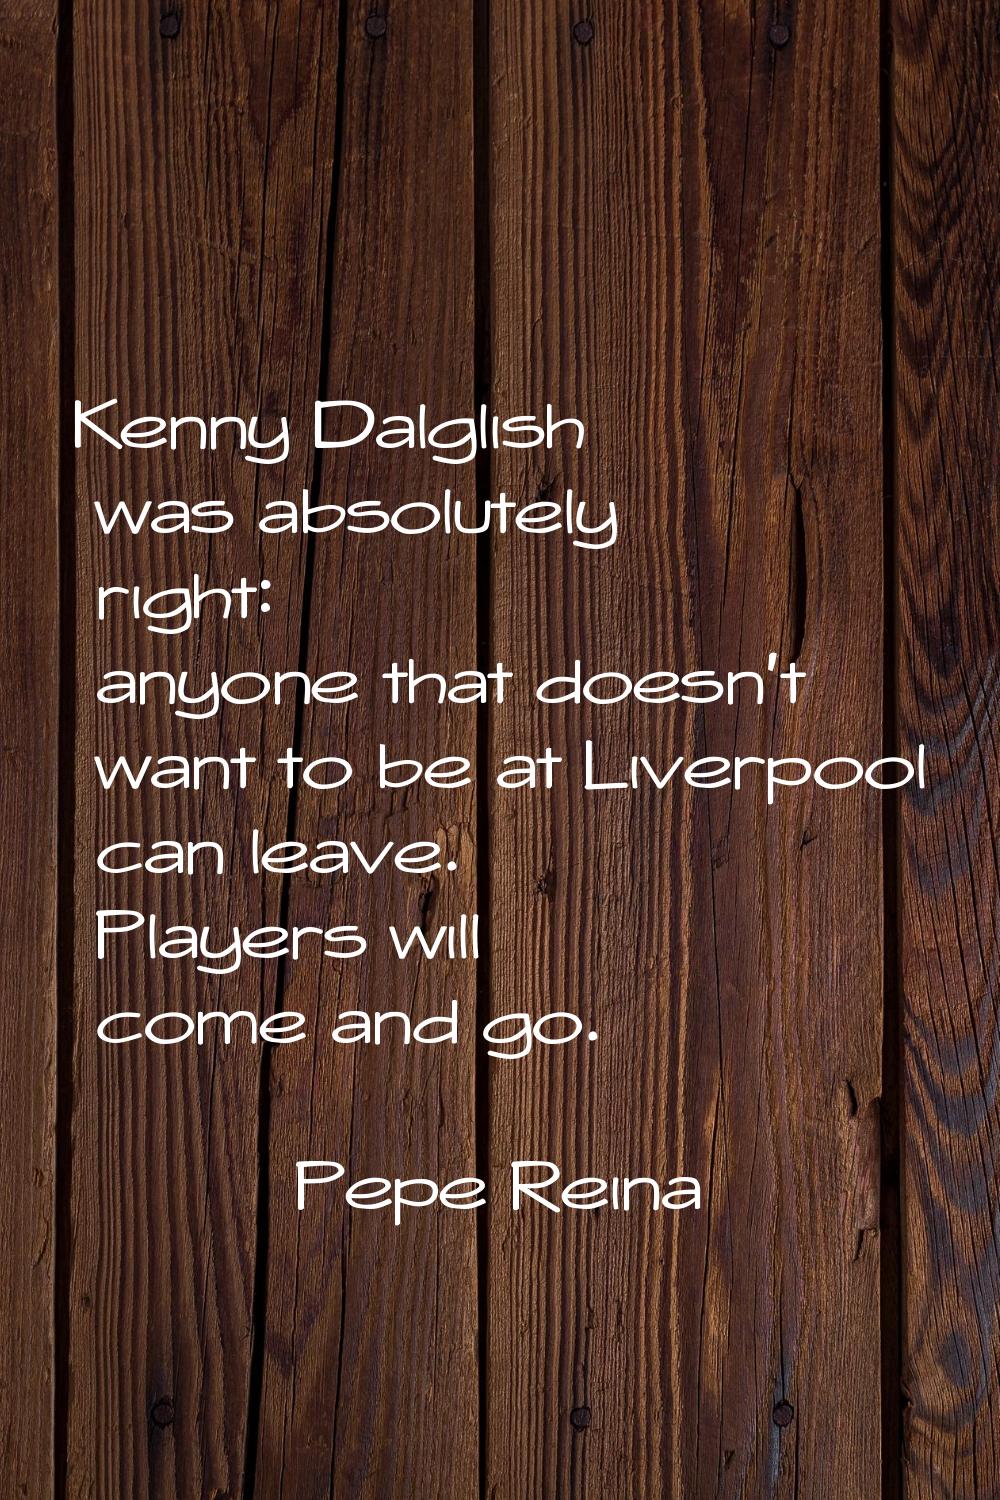 Kenny Dalglish was absolutely right: anyone that doesn't want to be at Liverpool can leave. Players